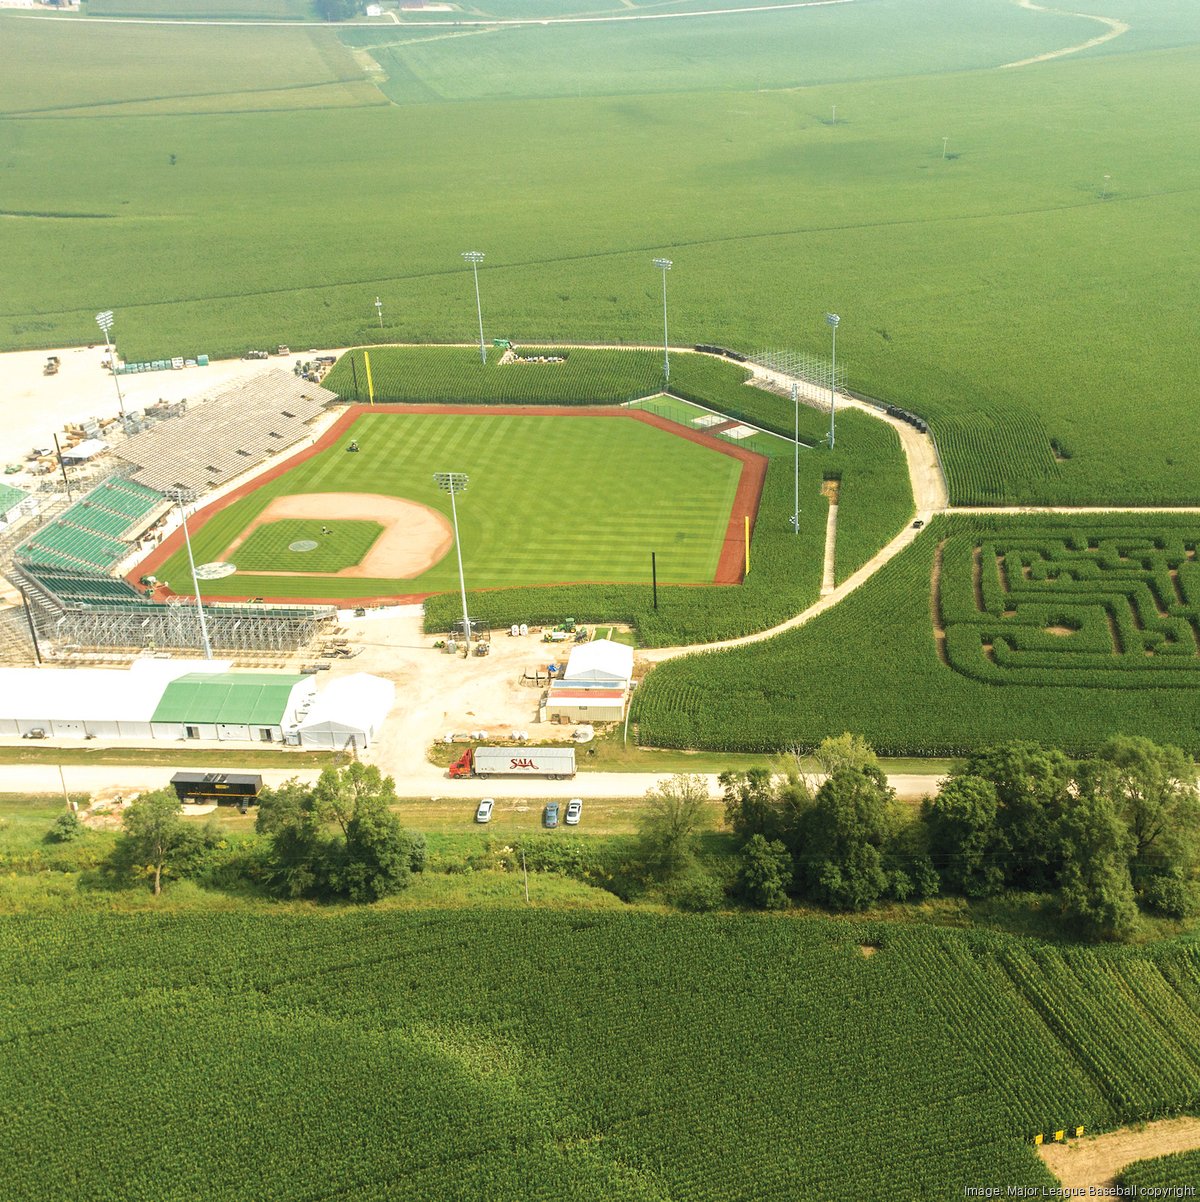 From cornfield to baseball stadium: Workers ready Field of Dreams for MLB  game, Tri-state News